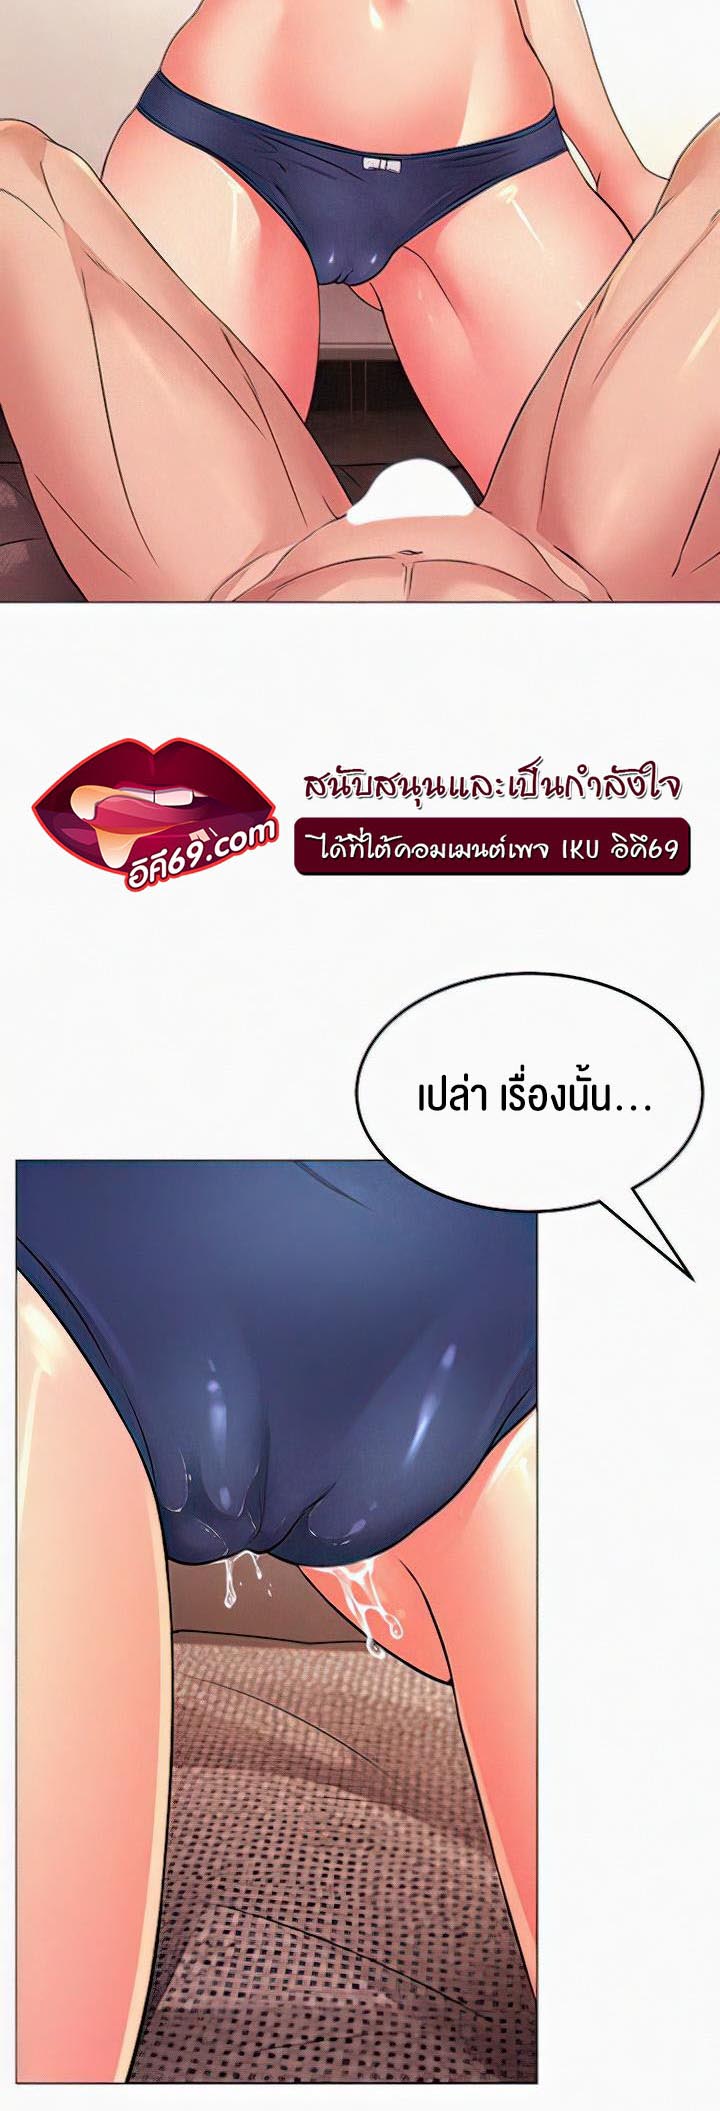 à¸­à¹ˆà¸²à¸™à¹‚à¸”à¸ˆà¸´à¸™ à¹€à¸£à¸·à¹ˆà¸­à¸‡ Mother in Law Bends To My Will 4 15